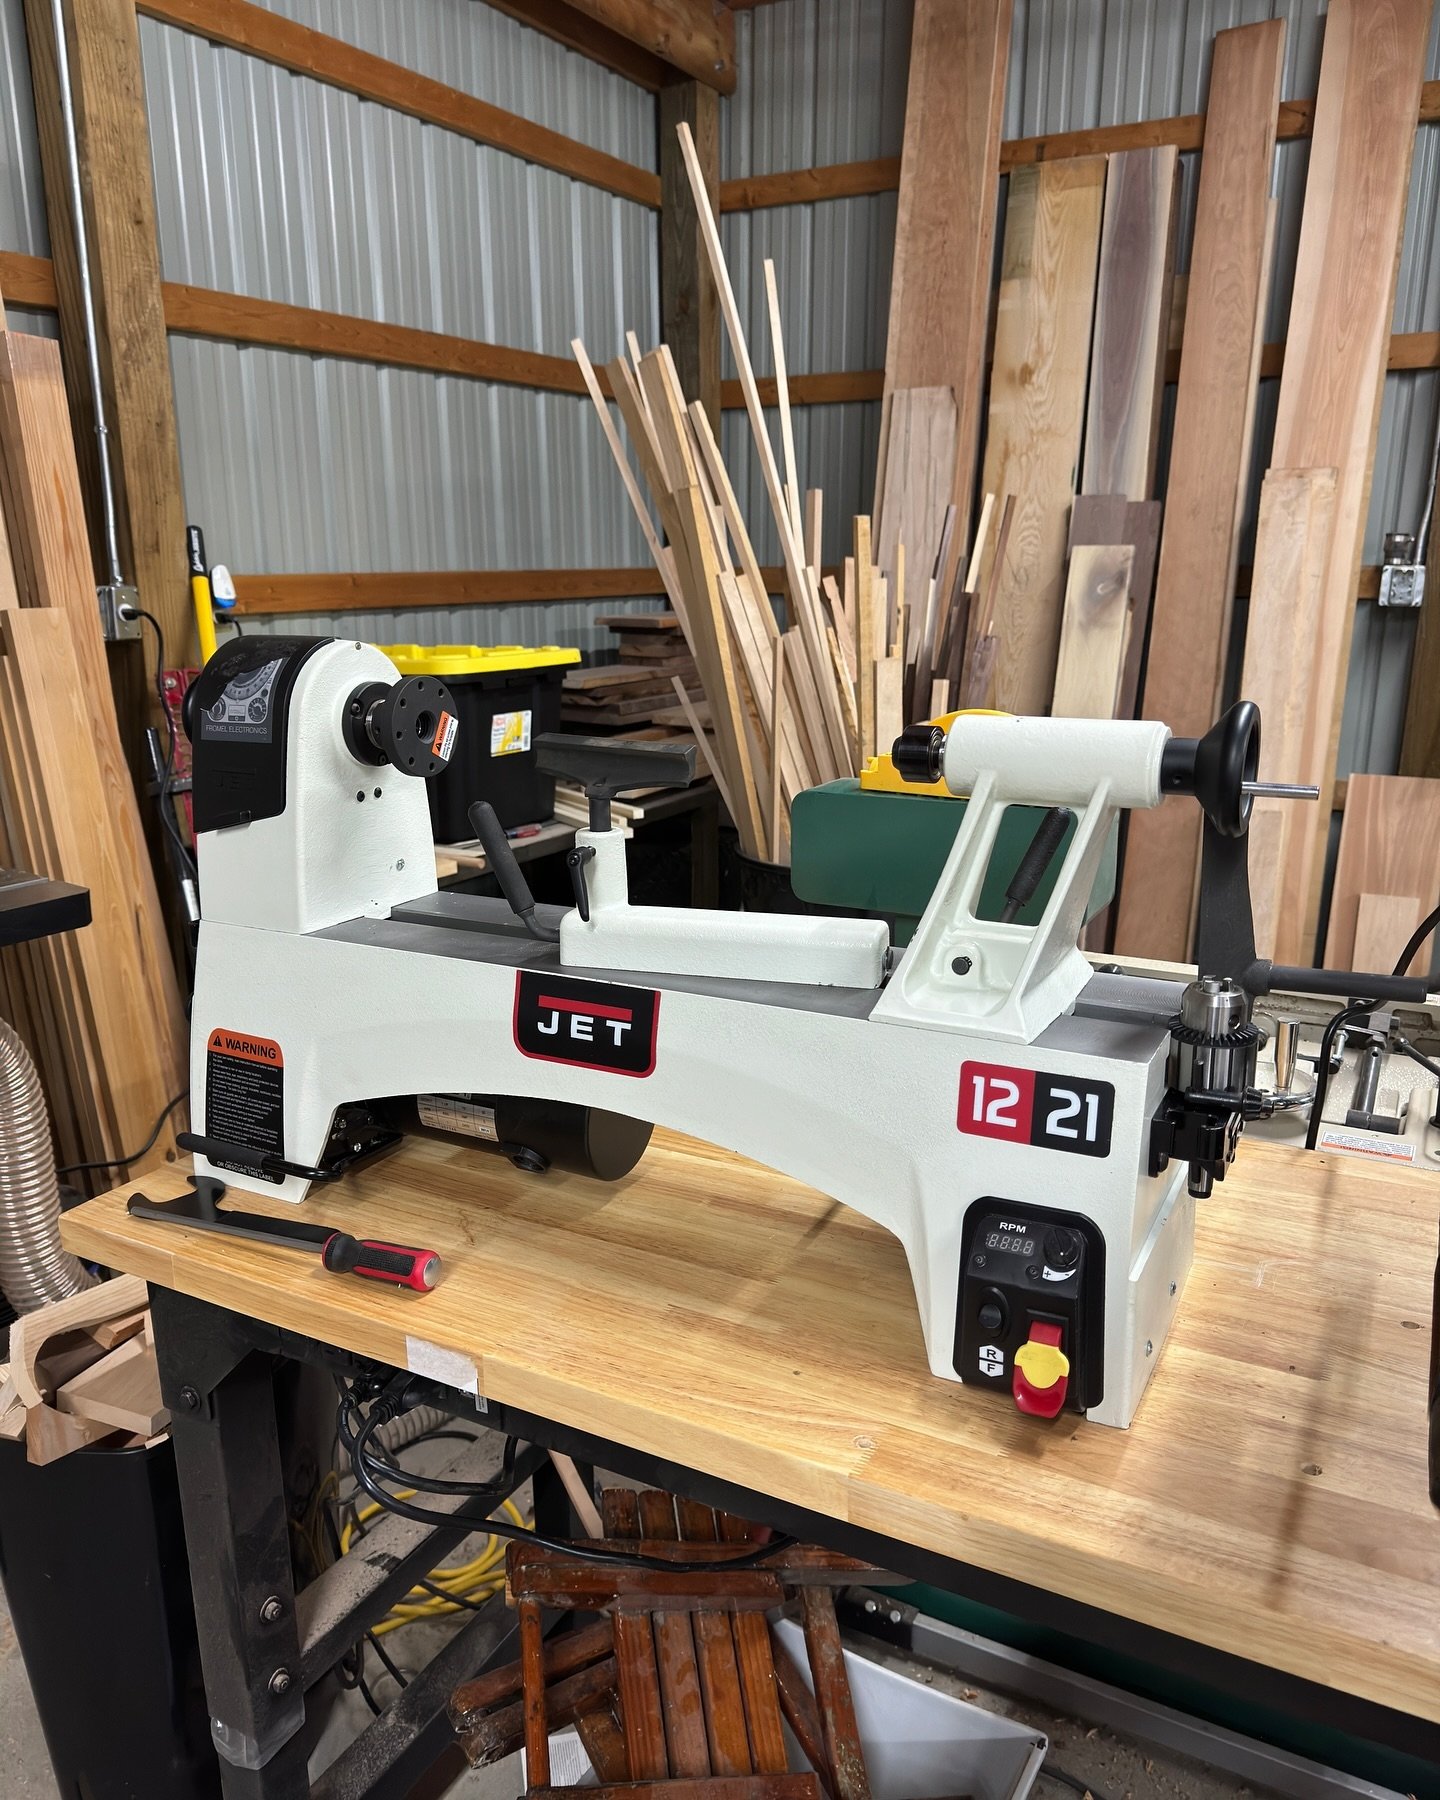 It&rsquo;s #NewToolTuesday welcome to our latest addition to our Life On Reed woodshop! This lightly used @jet.woodworking 1221 VS benchtop mid size lathe will transform our projects and expands our kitchen goods lineup. Huge thanks to amazing FB mar